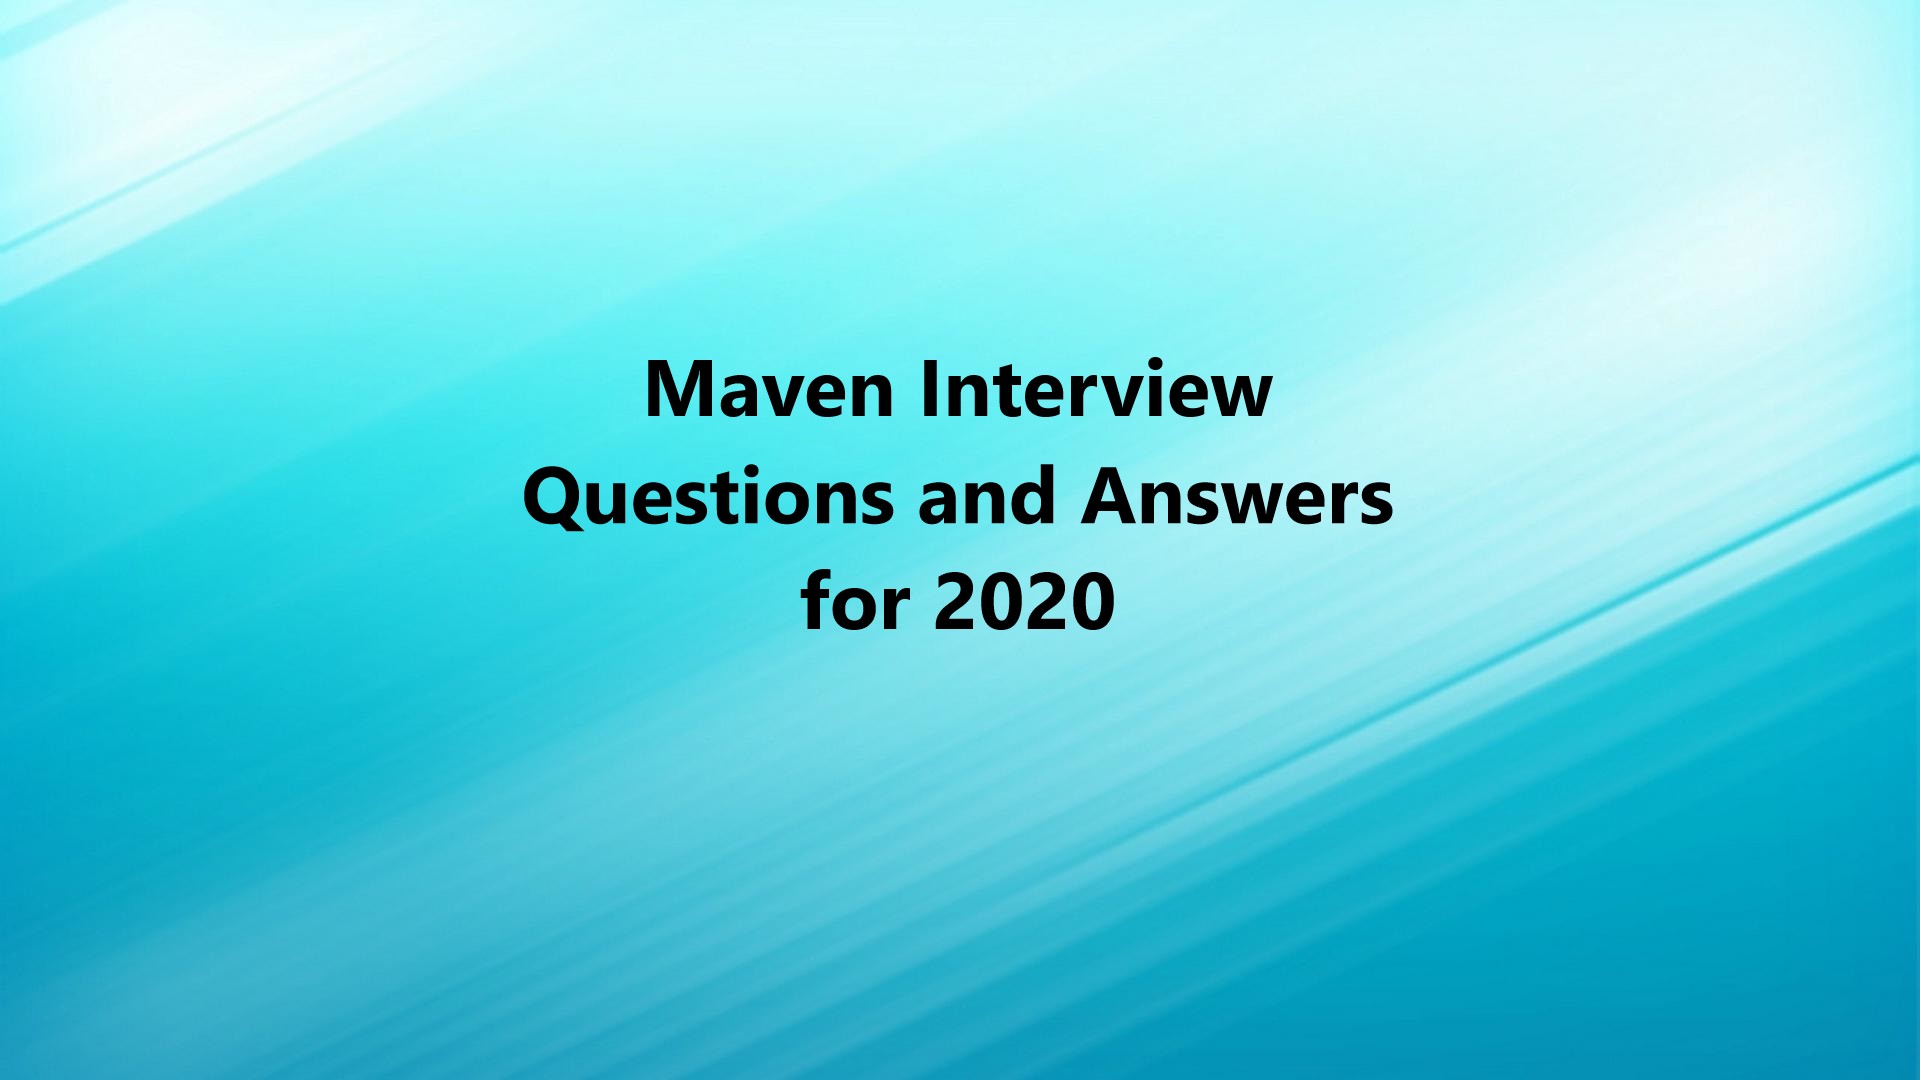 Maven Interview Questions and Answers for 2020